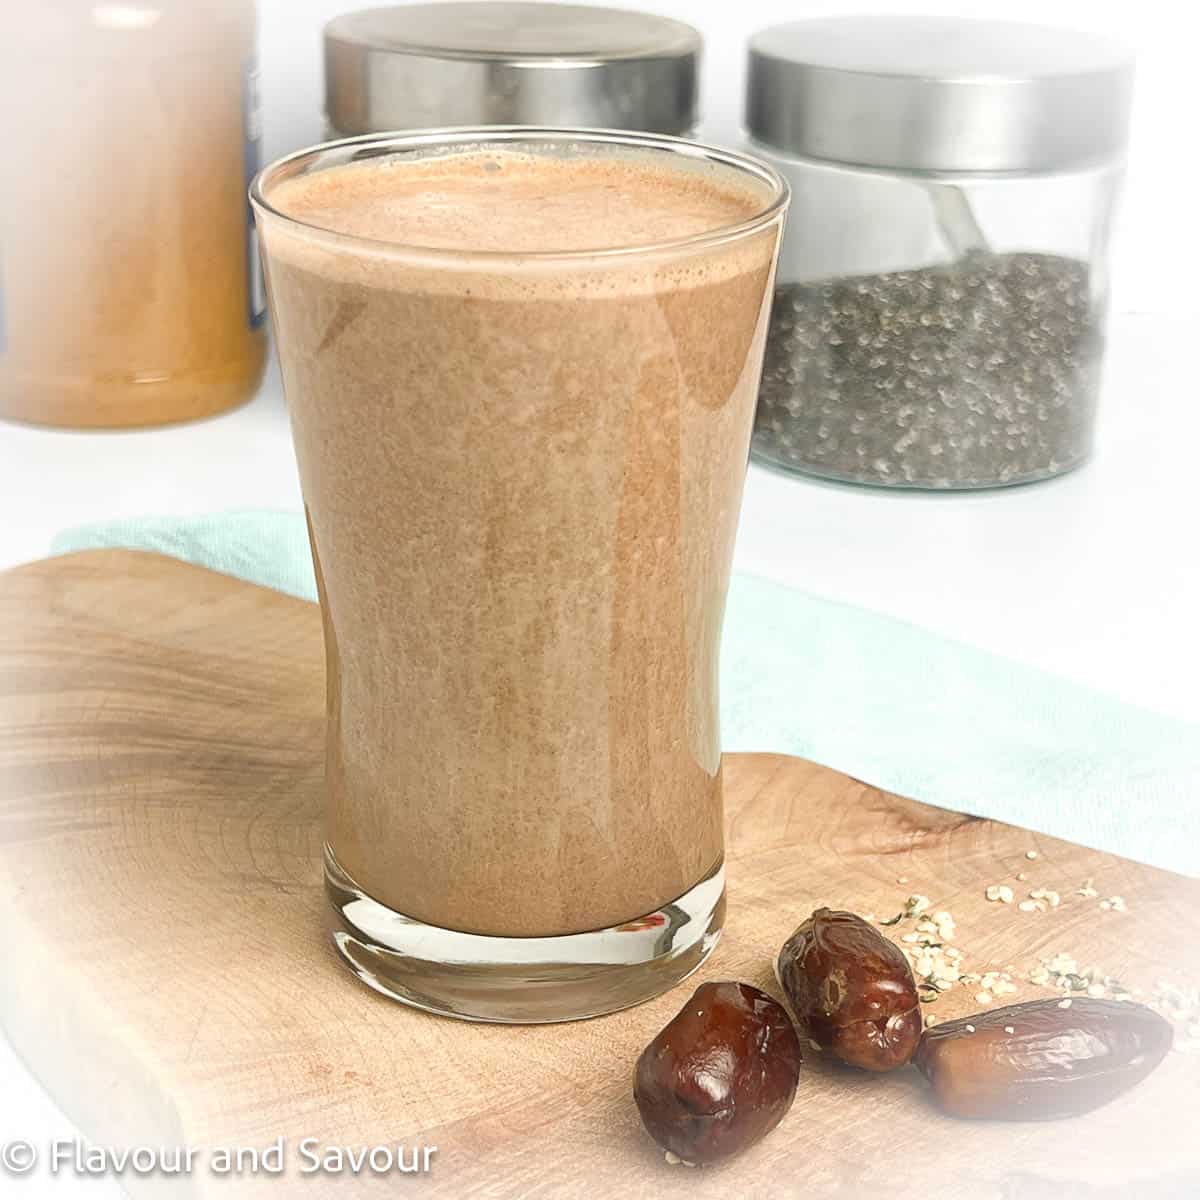 A glass of chocolate peanut butter smoothie with jars of ingredients in the background.